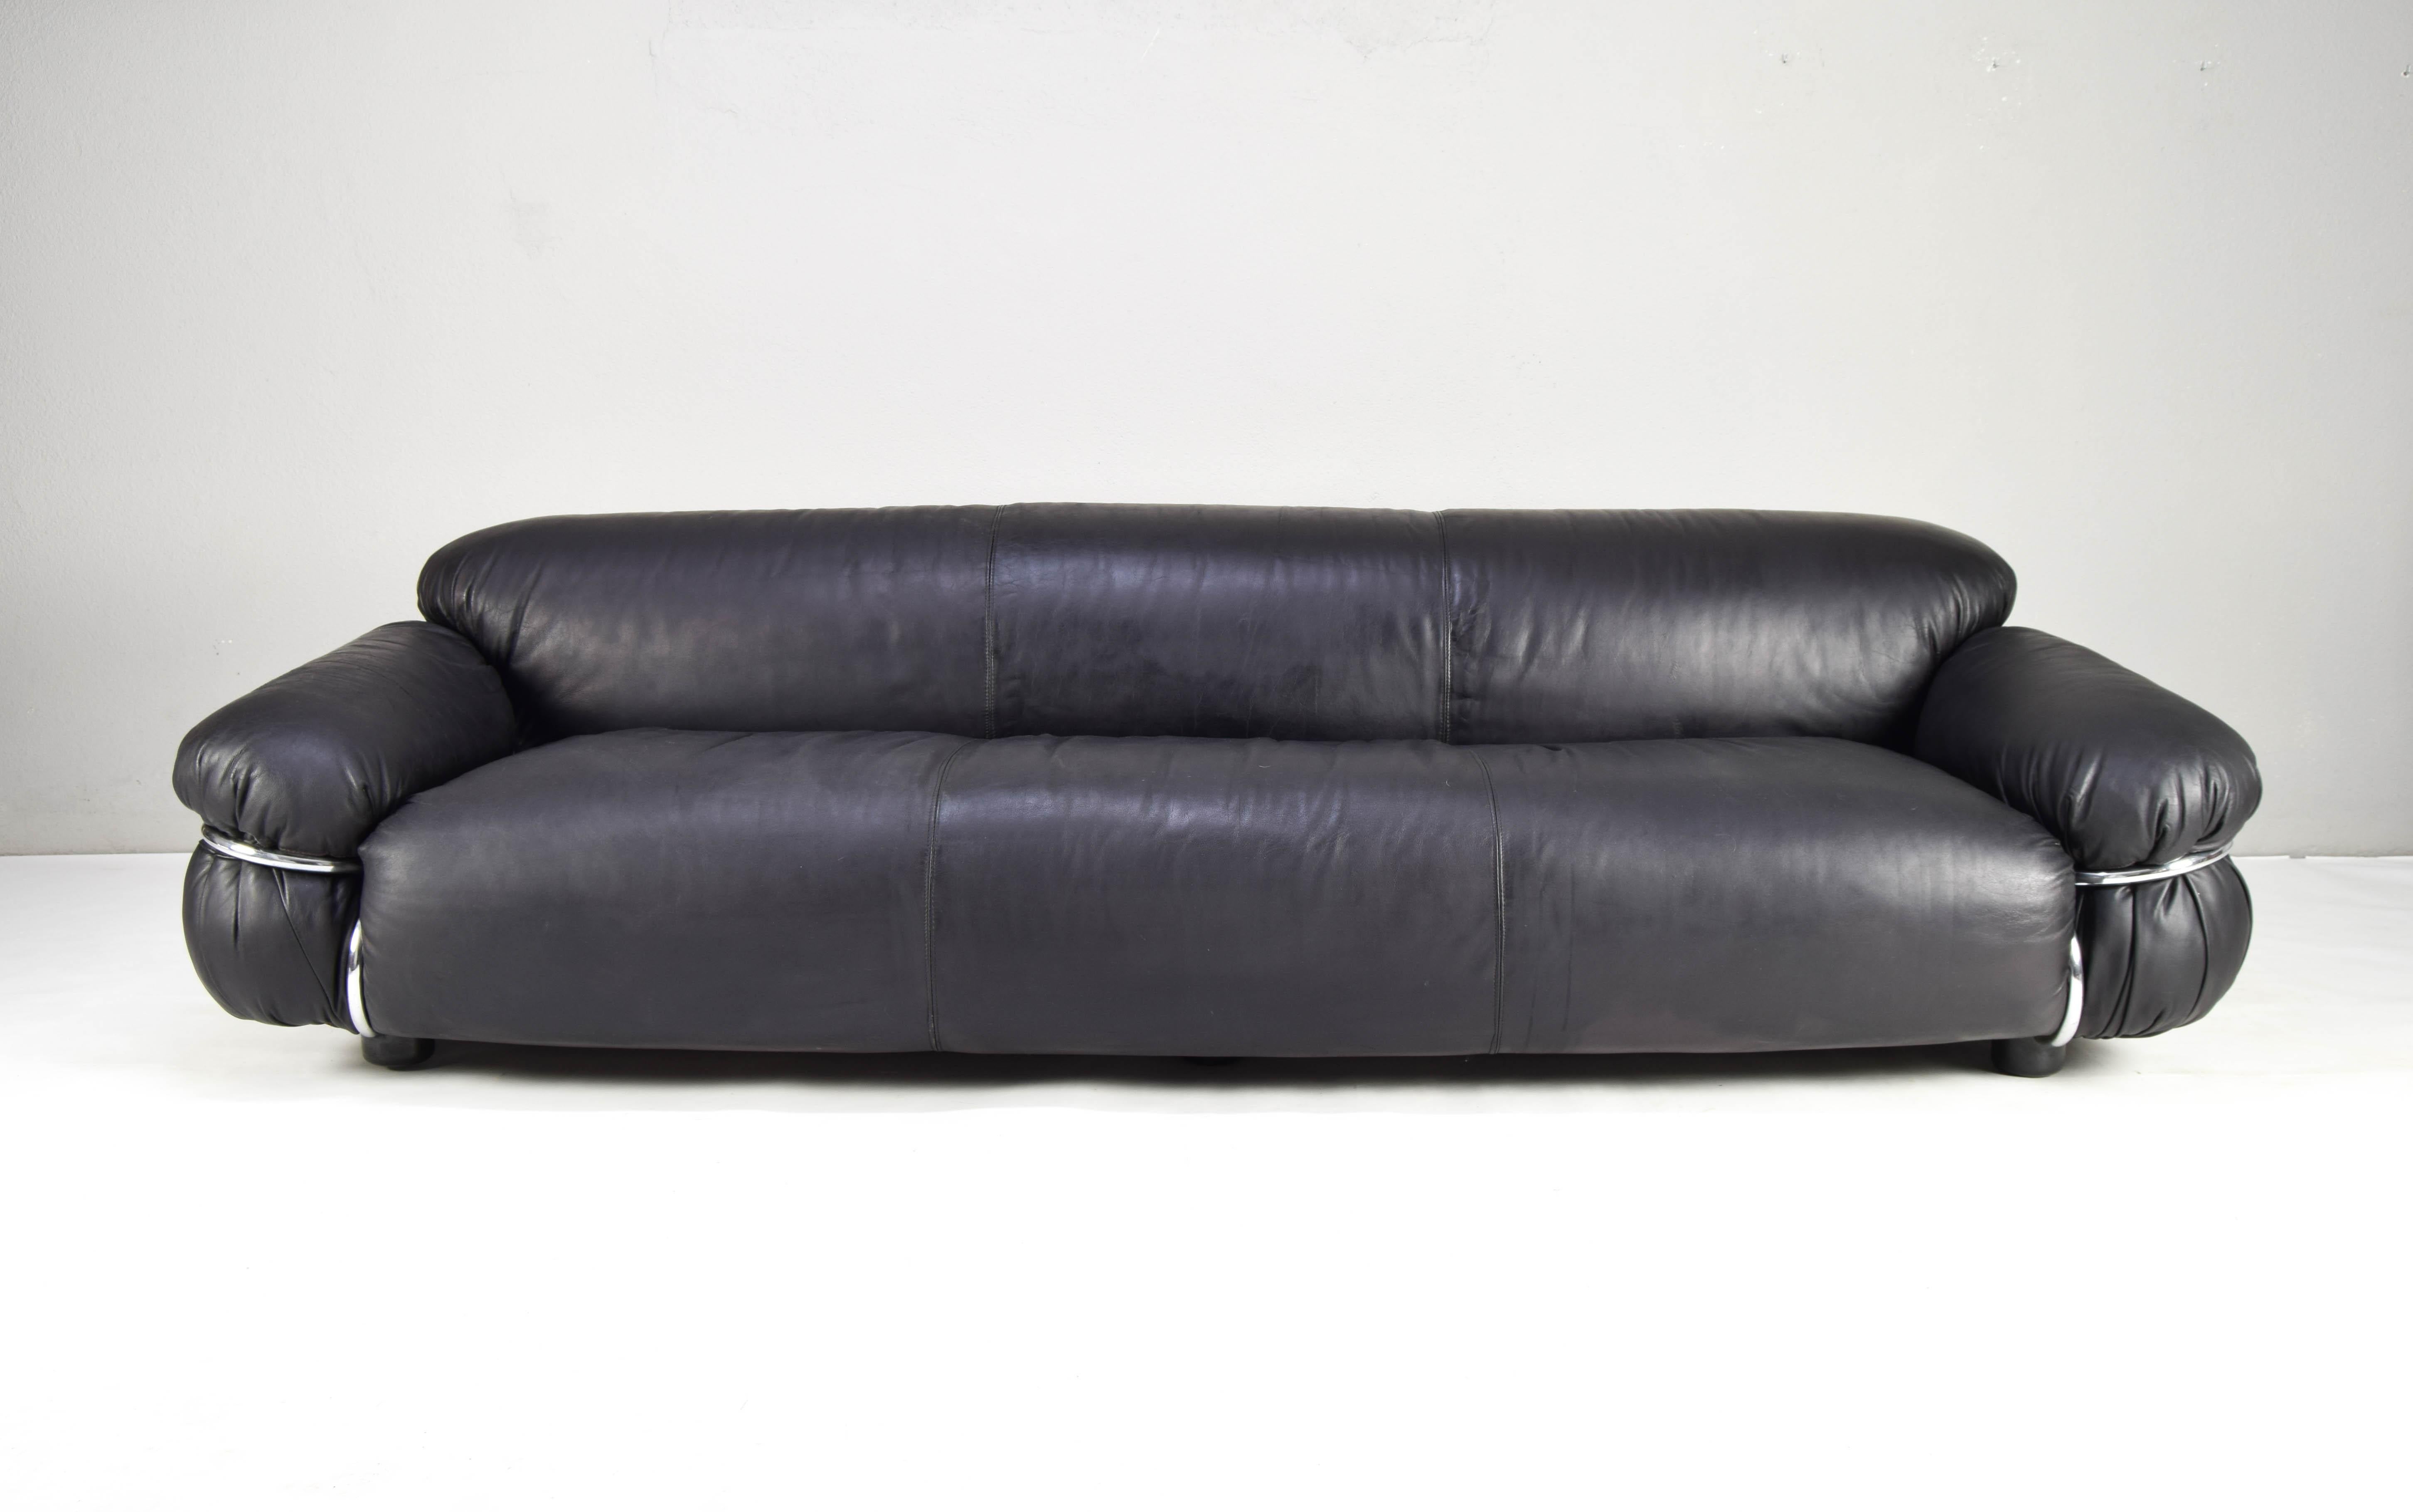 Italian Sesann sofa designed by Gianfranco Frattini for Casina in the 70s.
Body upholstered in black leather and chrome structure.
As detailed in the image of the armrest, the leather shows wear in that area but no breaks, it has been nurtured and